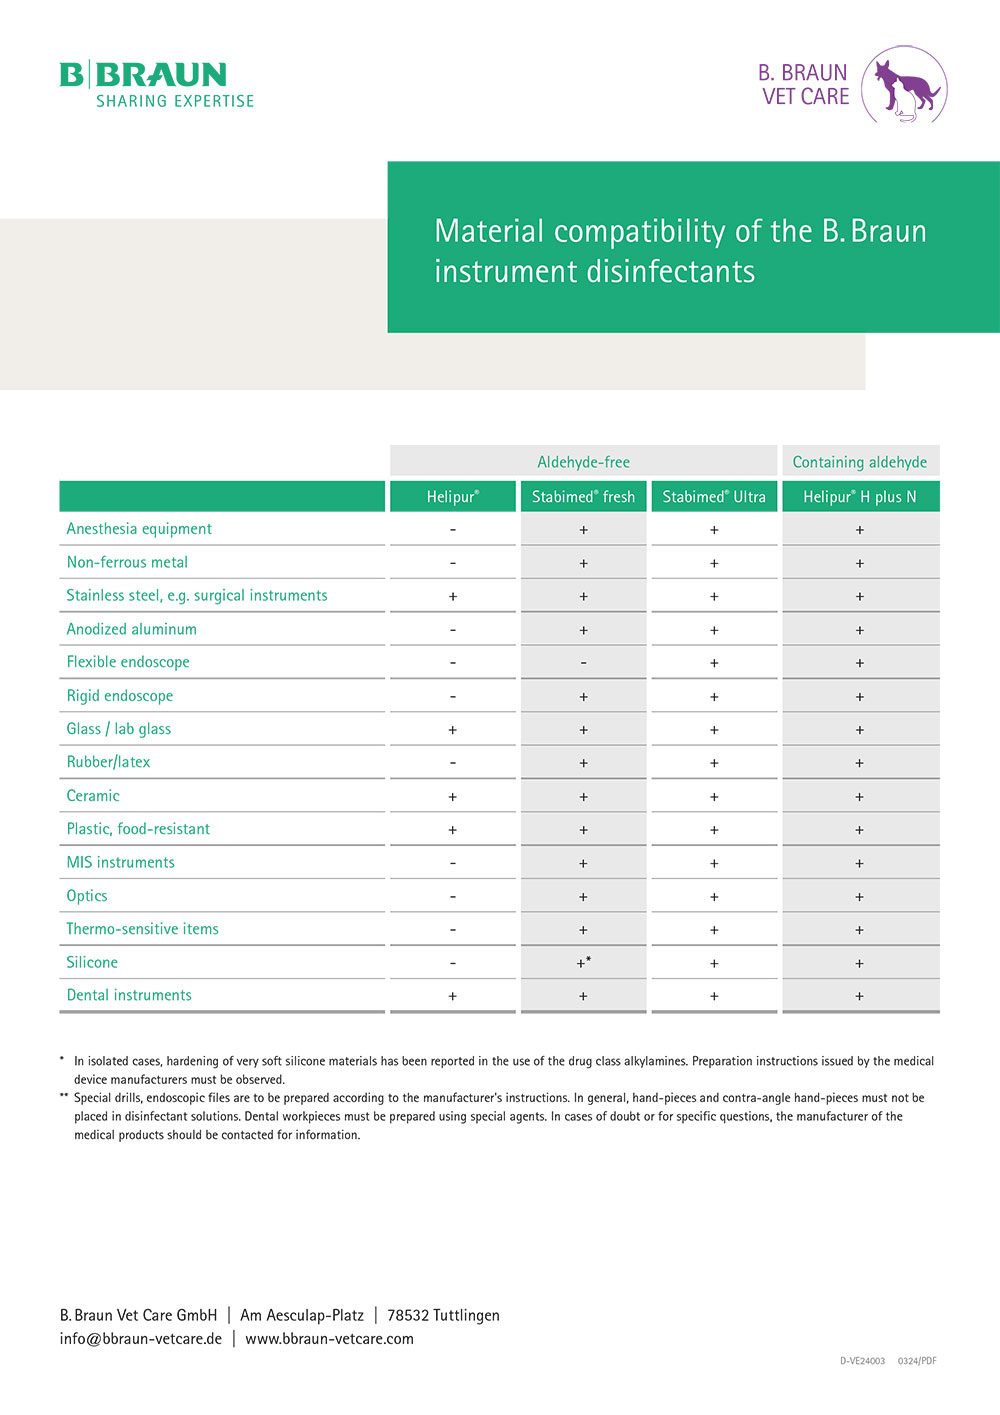 Table: Material compatibility of the B. Braun instrument disinfectants